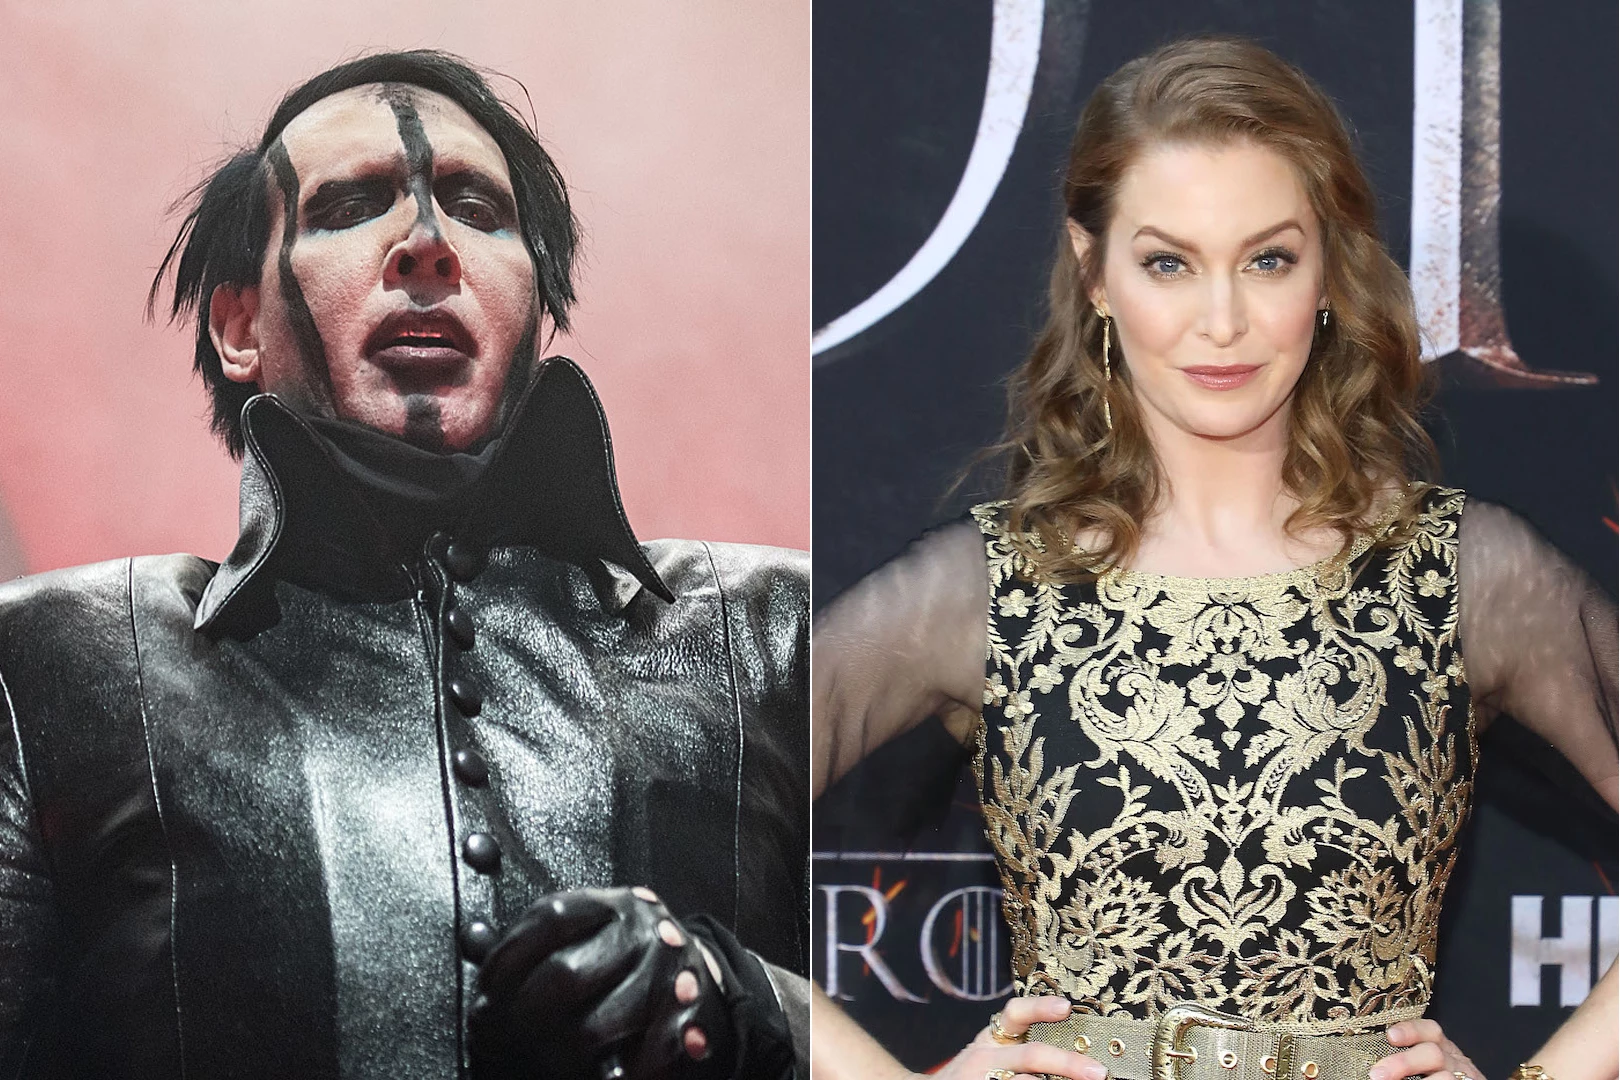 Game of Thrones' Actress Details Graphic Abuse by Marilyn Manson